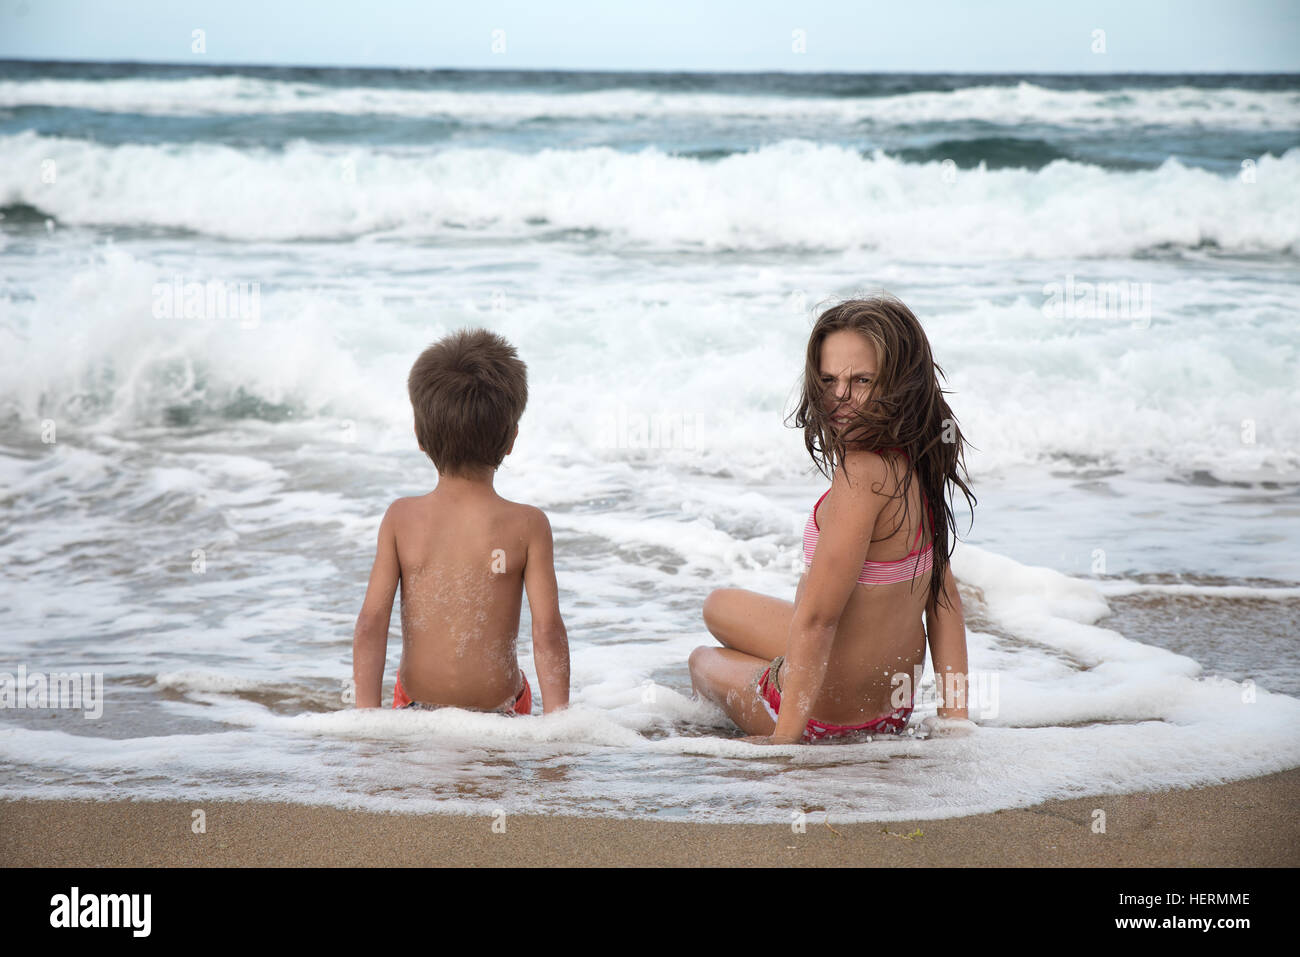 Girl and boy sitting on beach in water's edge Stock Photo